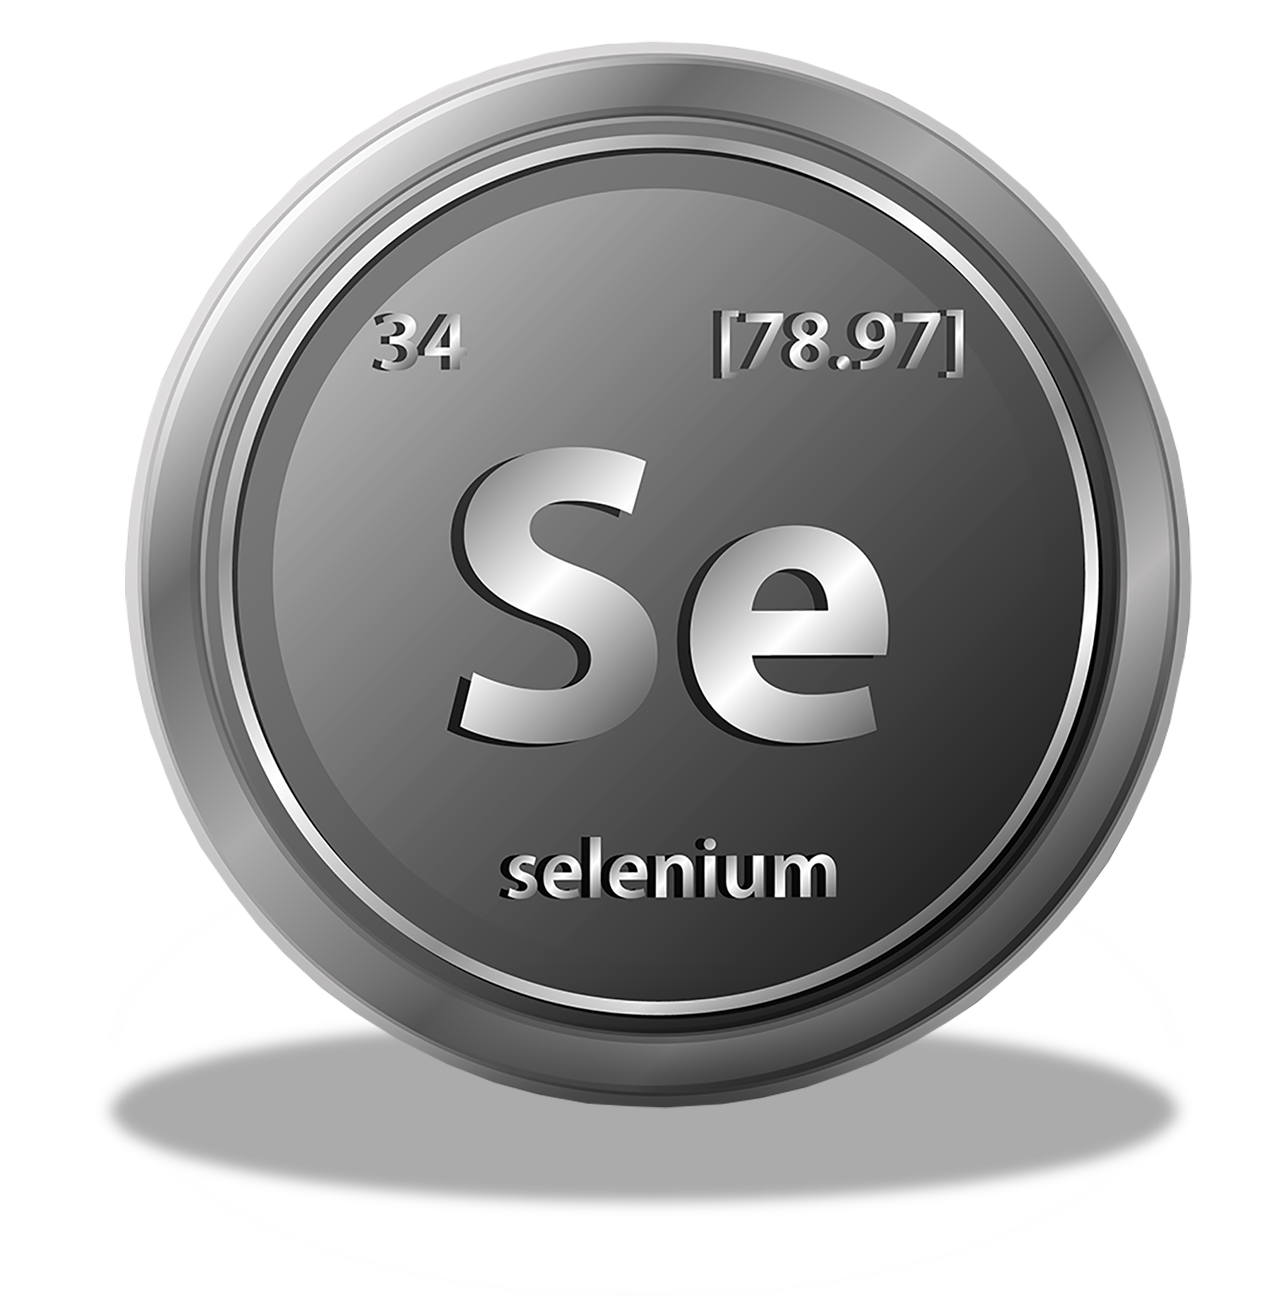 1280x1296px-selenium-chemical-element-chemical-symbol-with-atomic-number-and-atomic-mass-vWA24